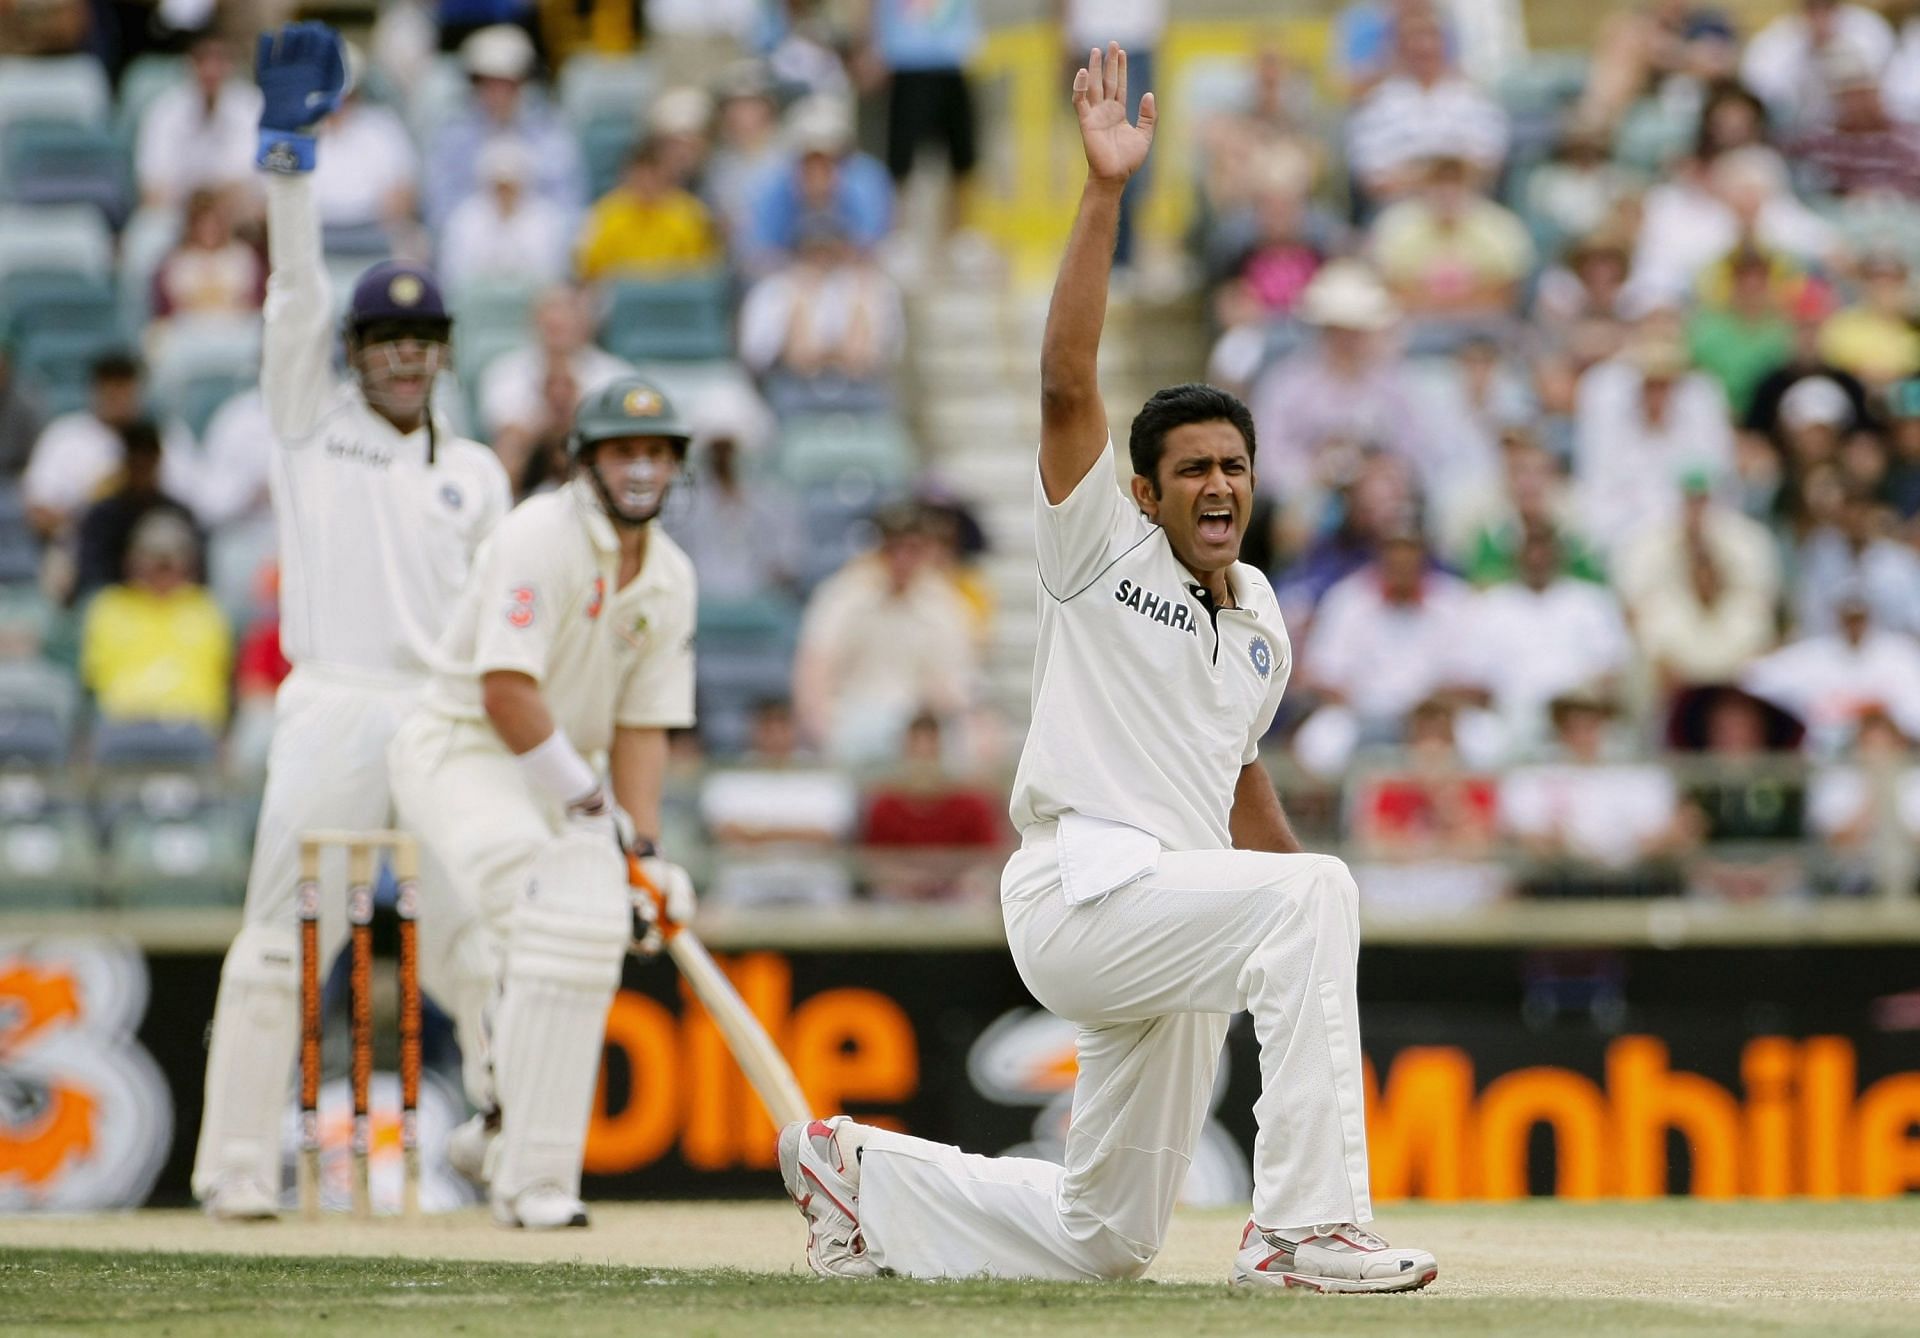 Bowlers like Anil Kumble had to work much harder for their wickets